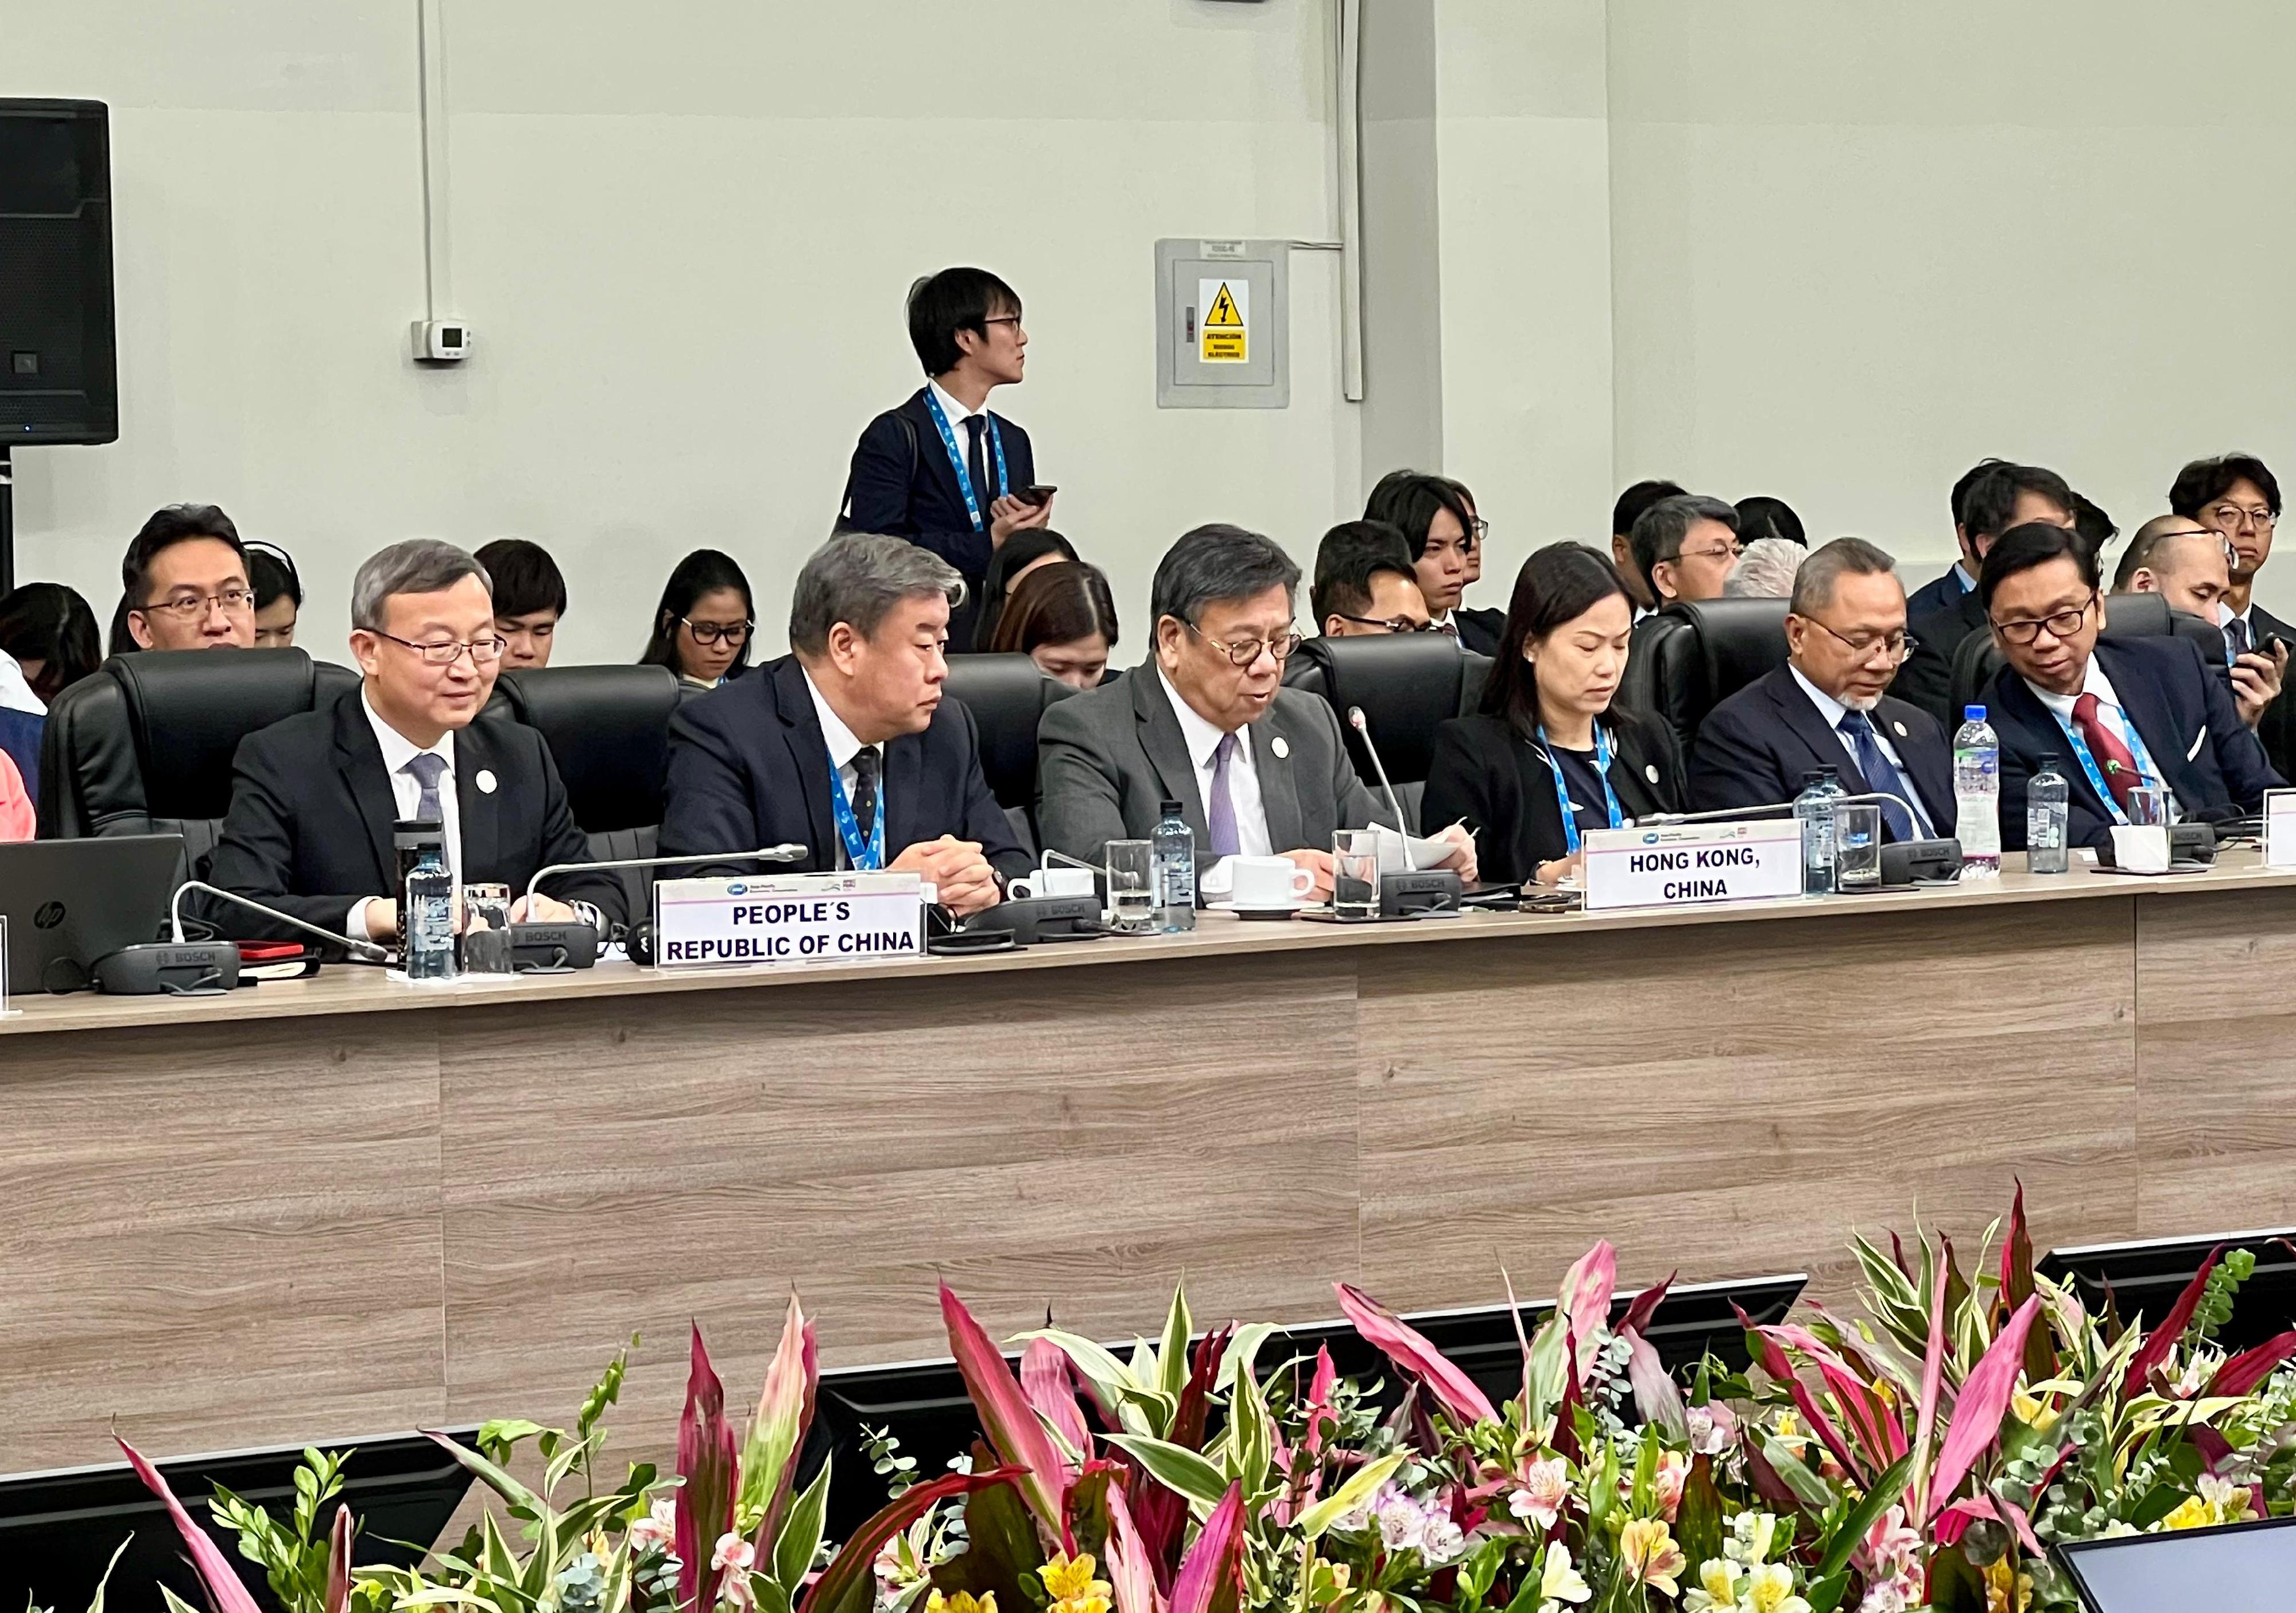 The Secretary for Commerce and Economic Development, Mr Algernon Yau (front row, third left), speaks at a discussion session entitled "Trade Liberalisation: Free Trade Area of the Asia-Pacific" at the Asia-Pacific Economic Cooperation Ministers Responsible for Trade Meeting in Arequipa, Peru, on May 18 (Arequipa time). Looking on is the Director-General of Trade and Industry, Ms Maggie Wong (front row, third right).